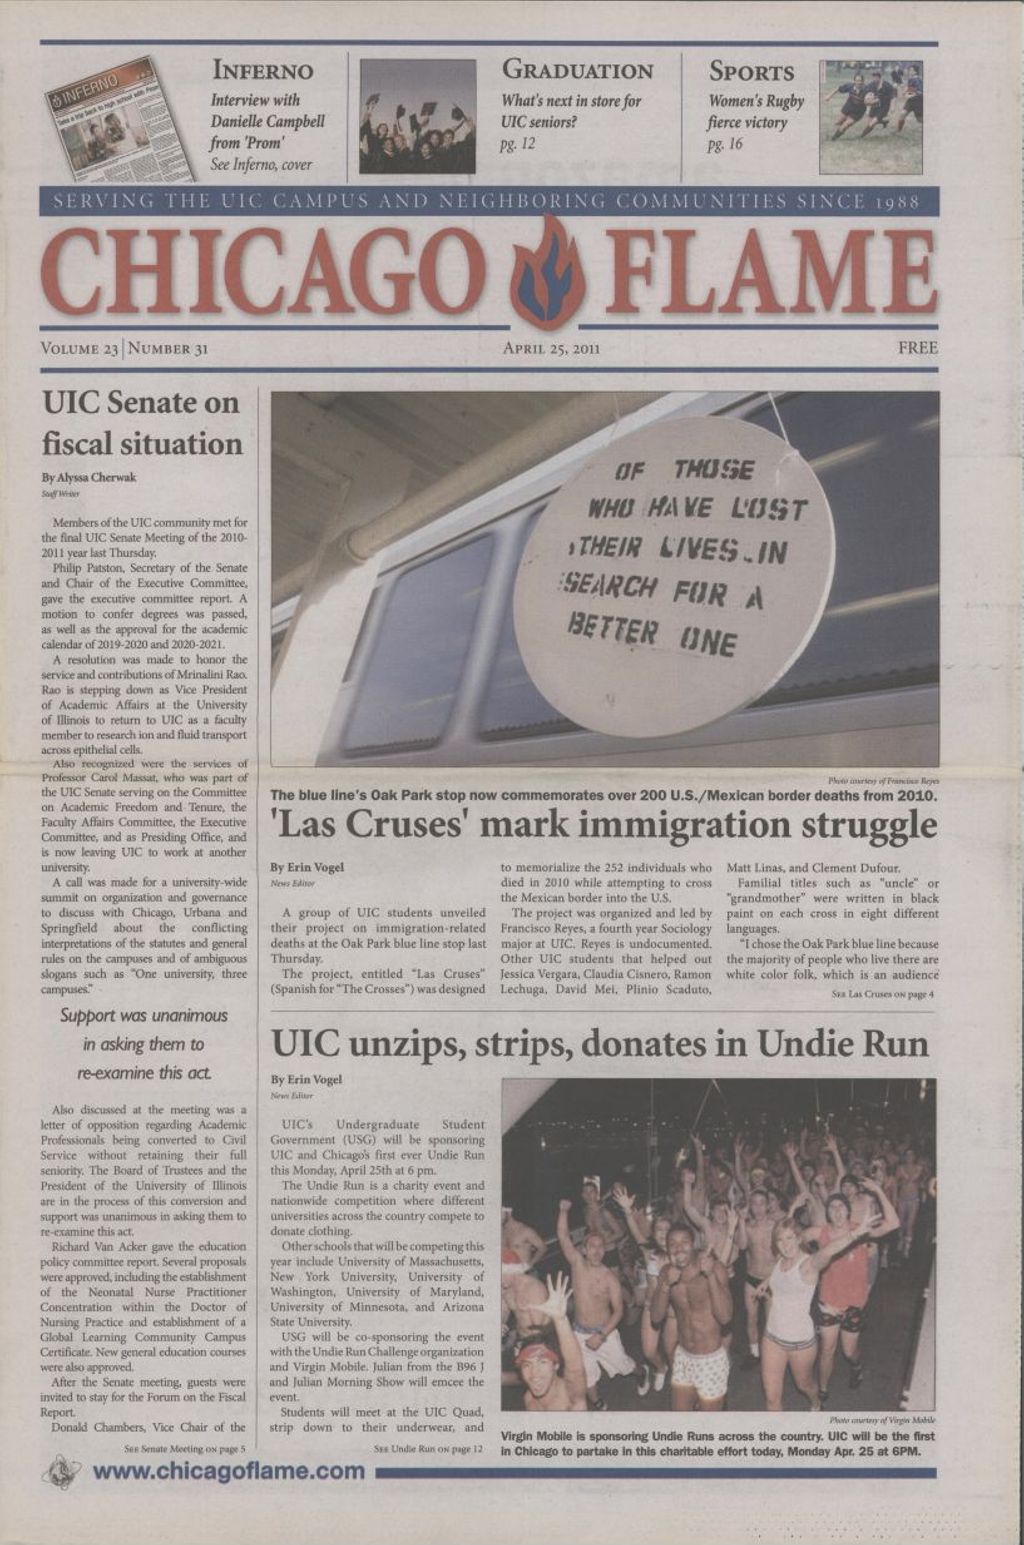 Miniature of Chicago Flame (April 25, 2011)